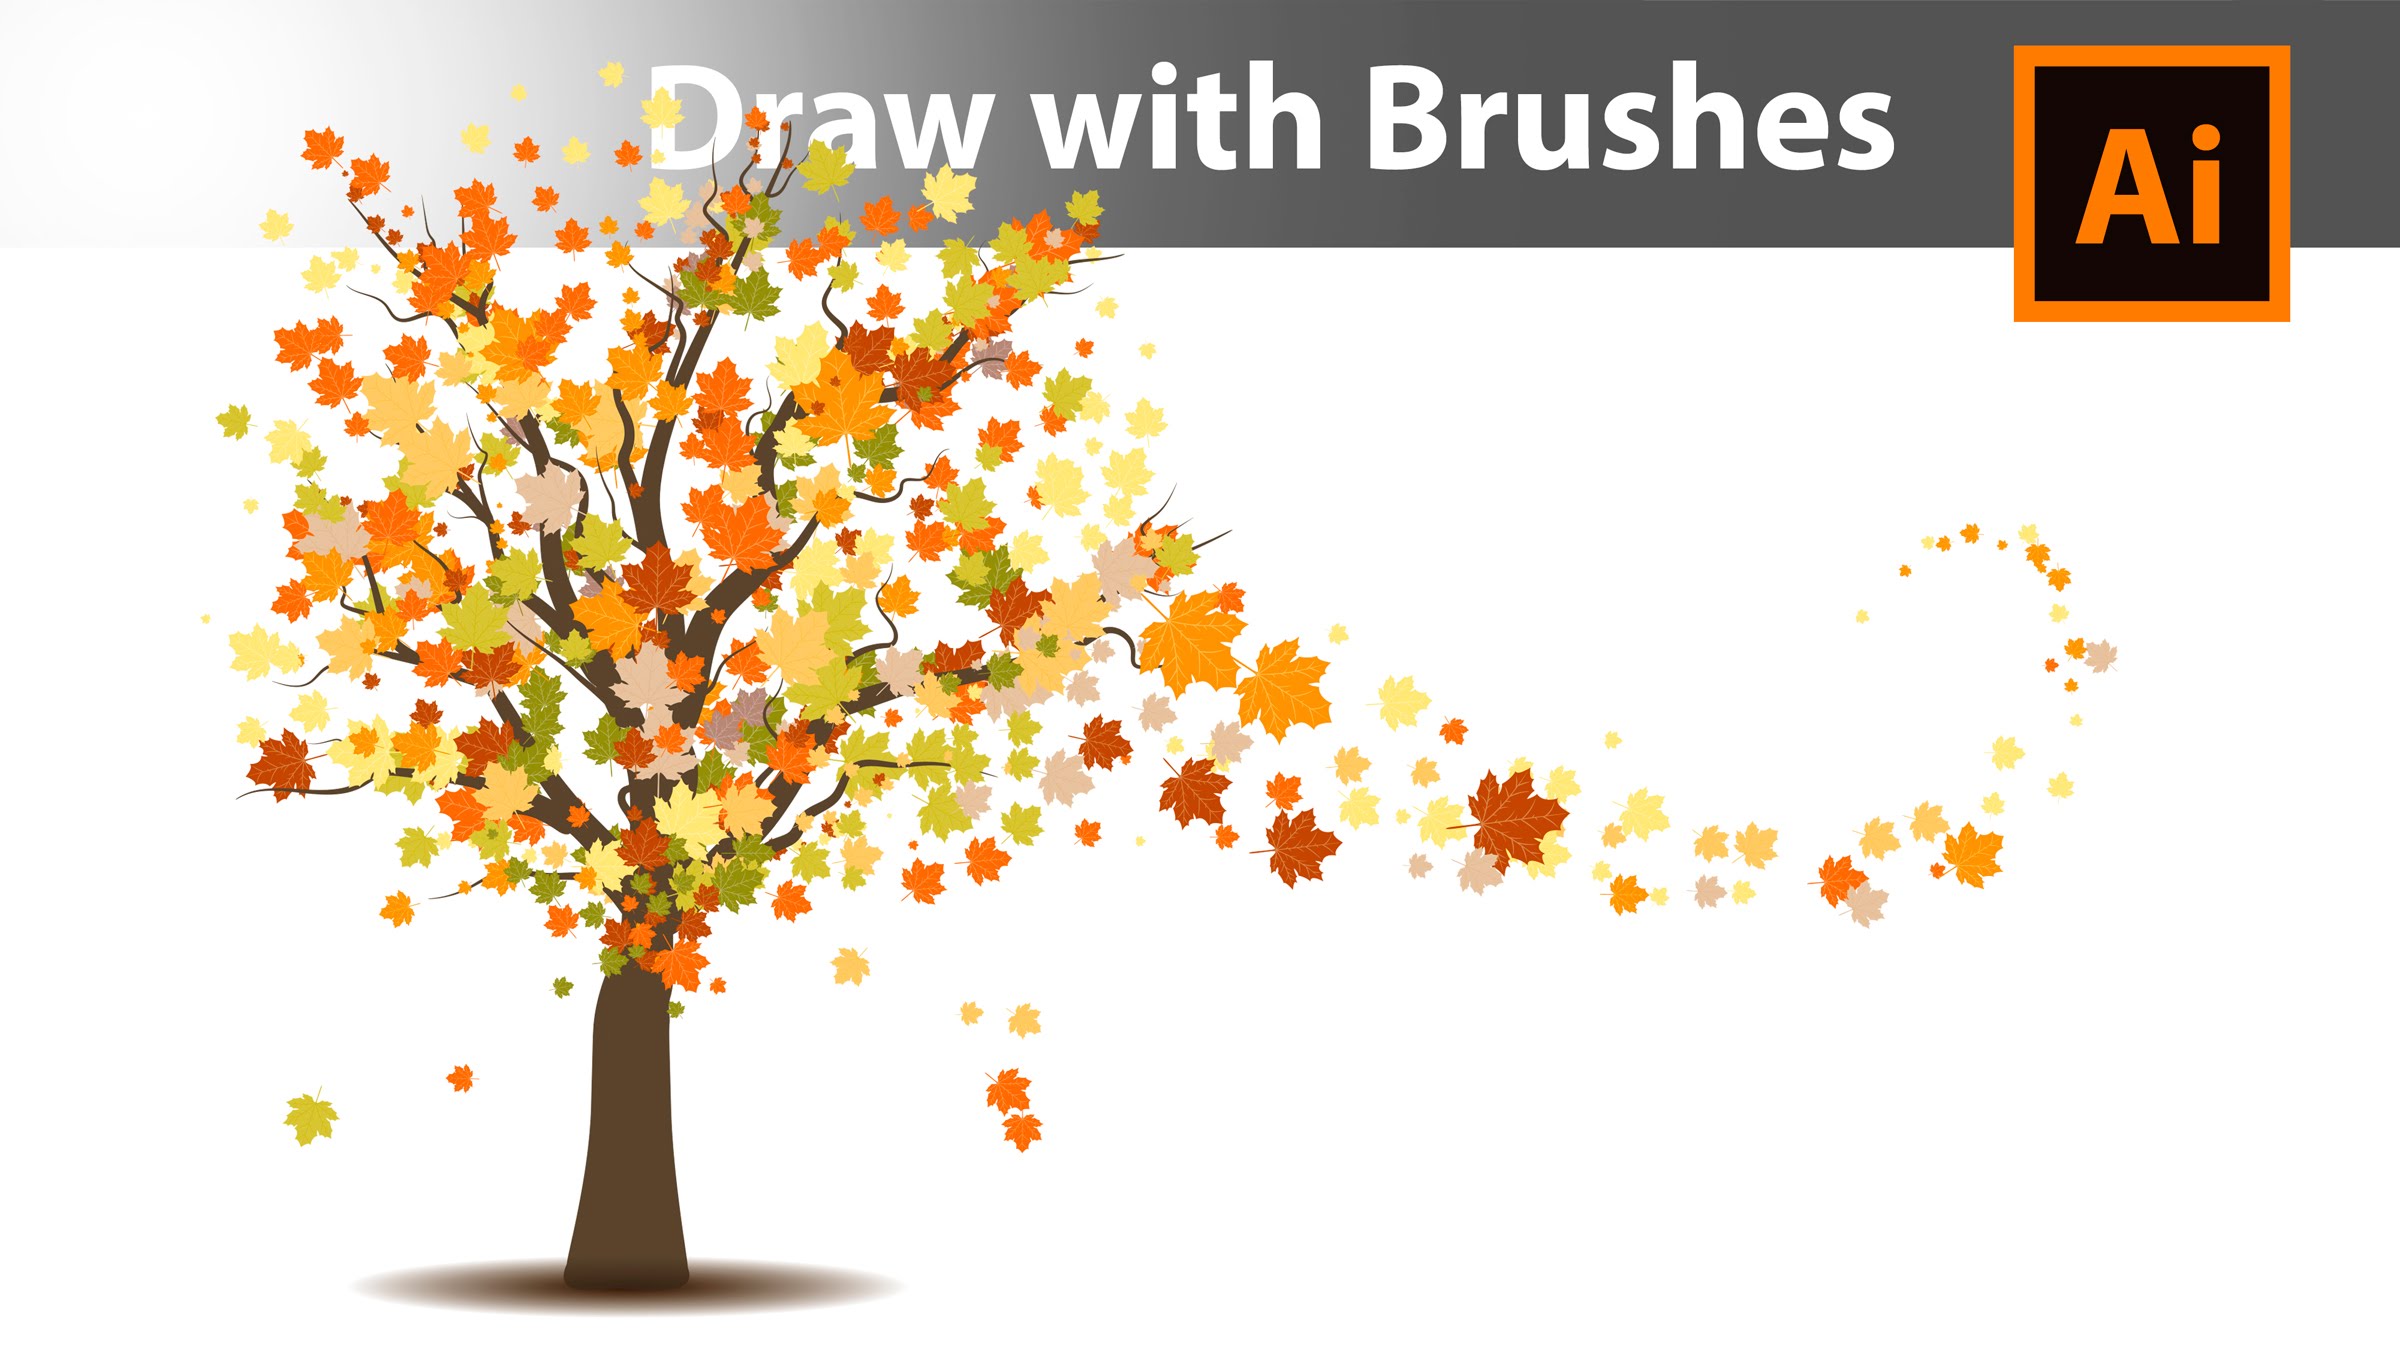 How to draw an Autumn Tree with brushes in Adobe Illustrator - YouTube